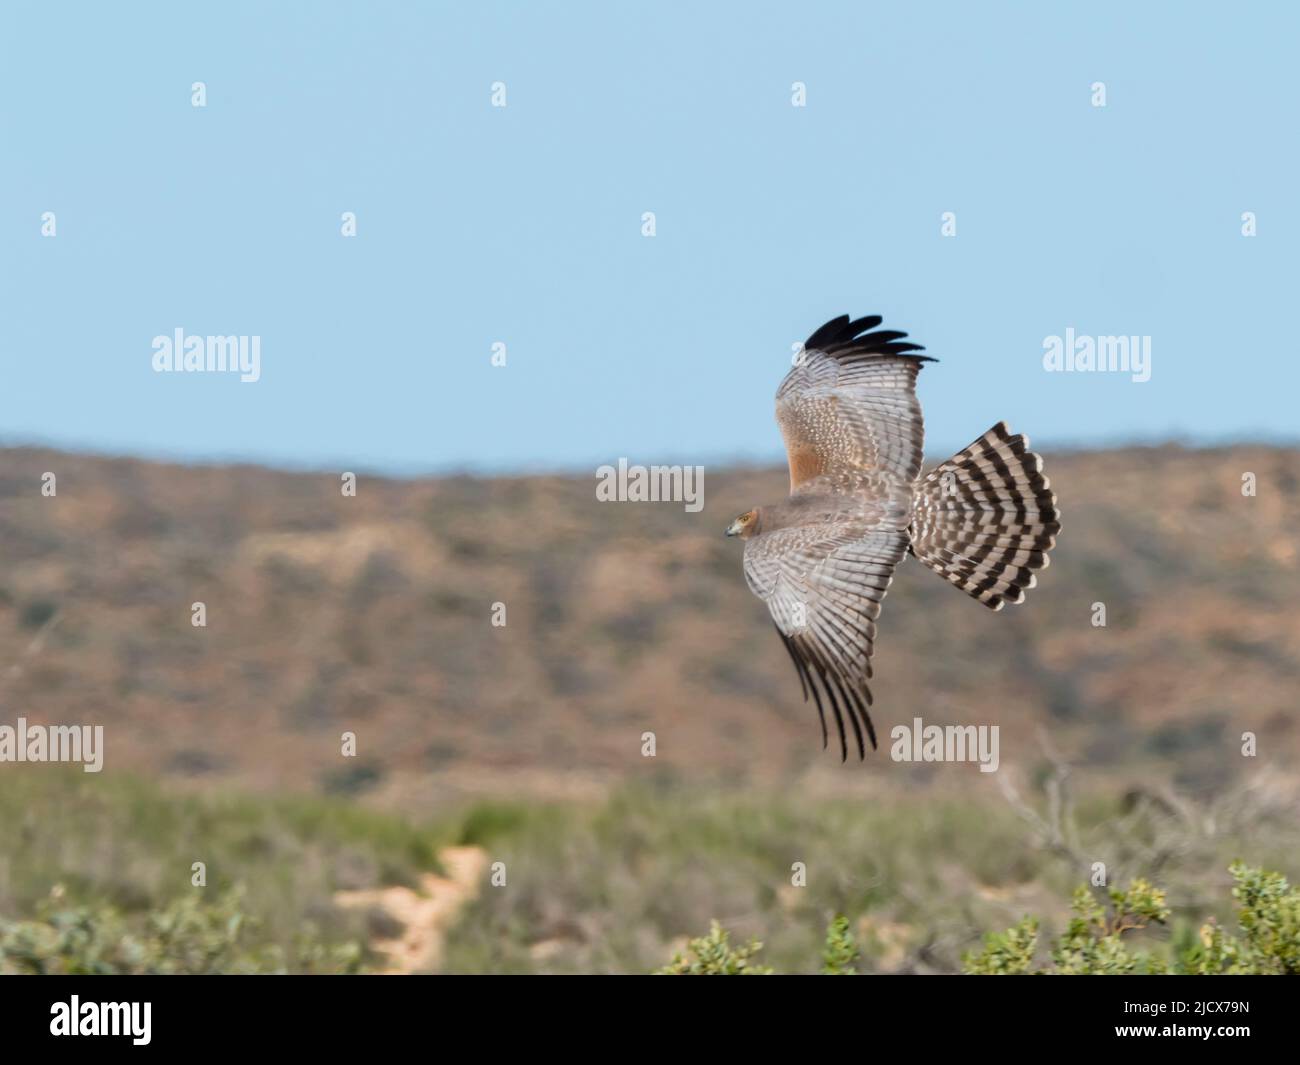 Adult spotted harrier (Circus assimilis), in flight in Cape Range National Park, Western Australia, Australia, Pacific Stock Photo